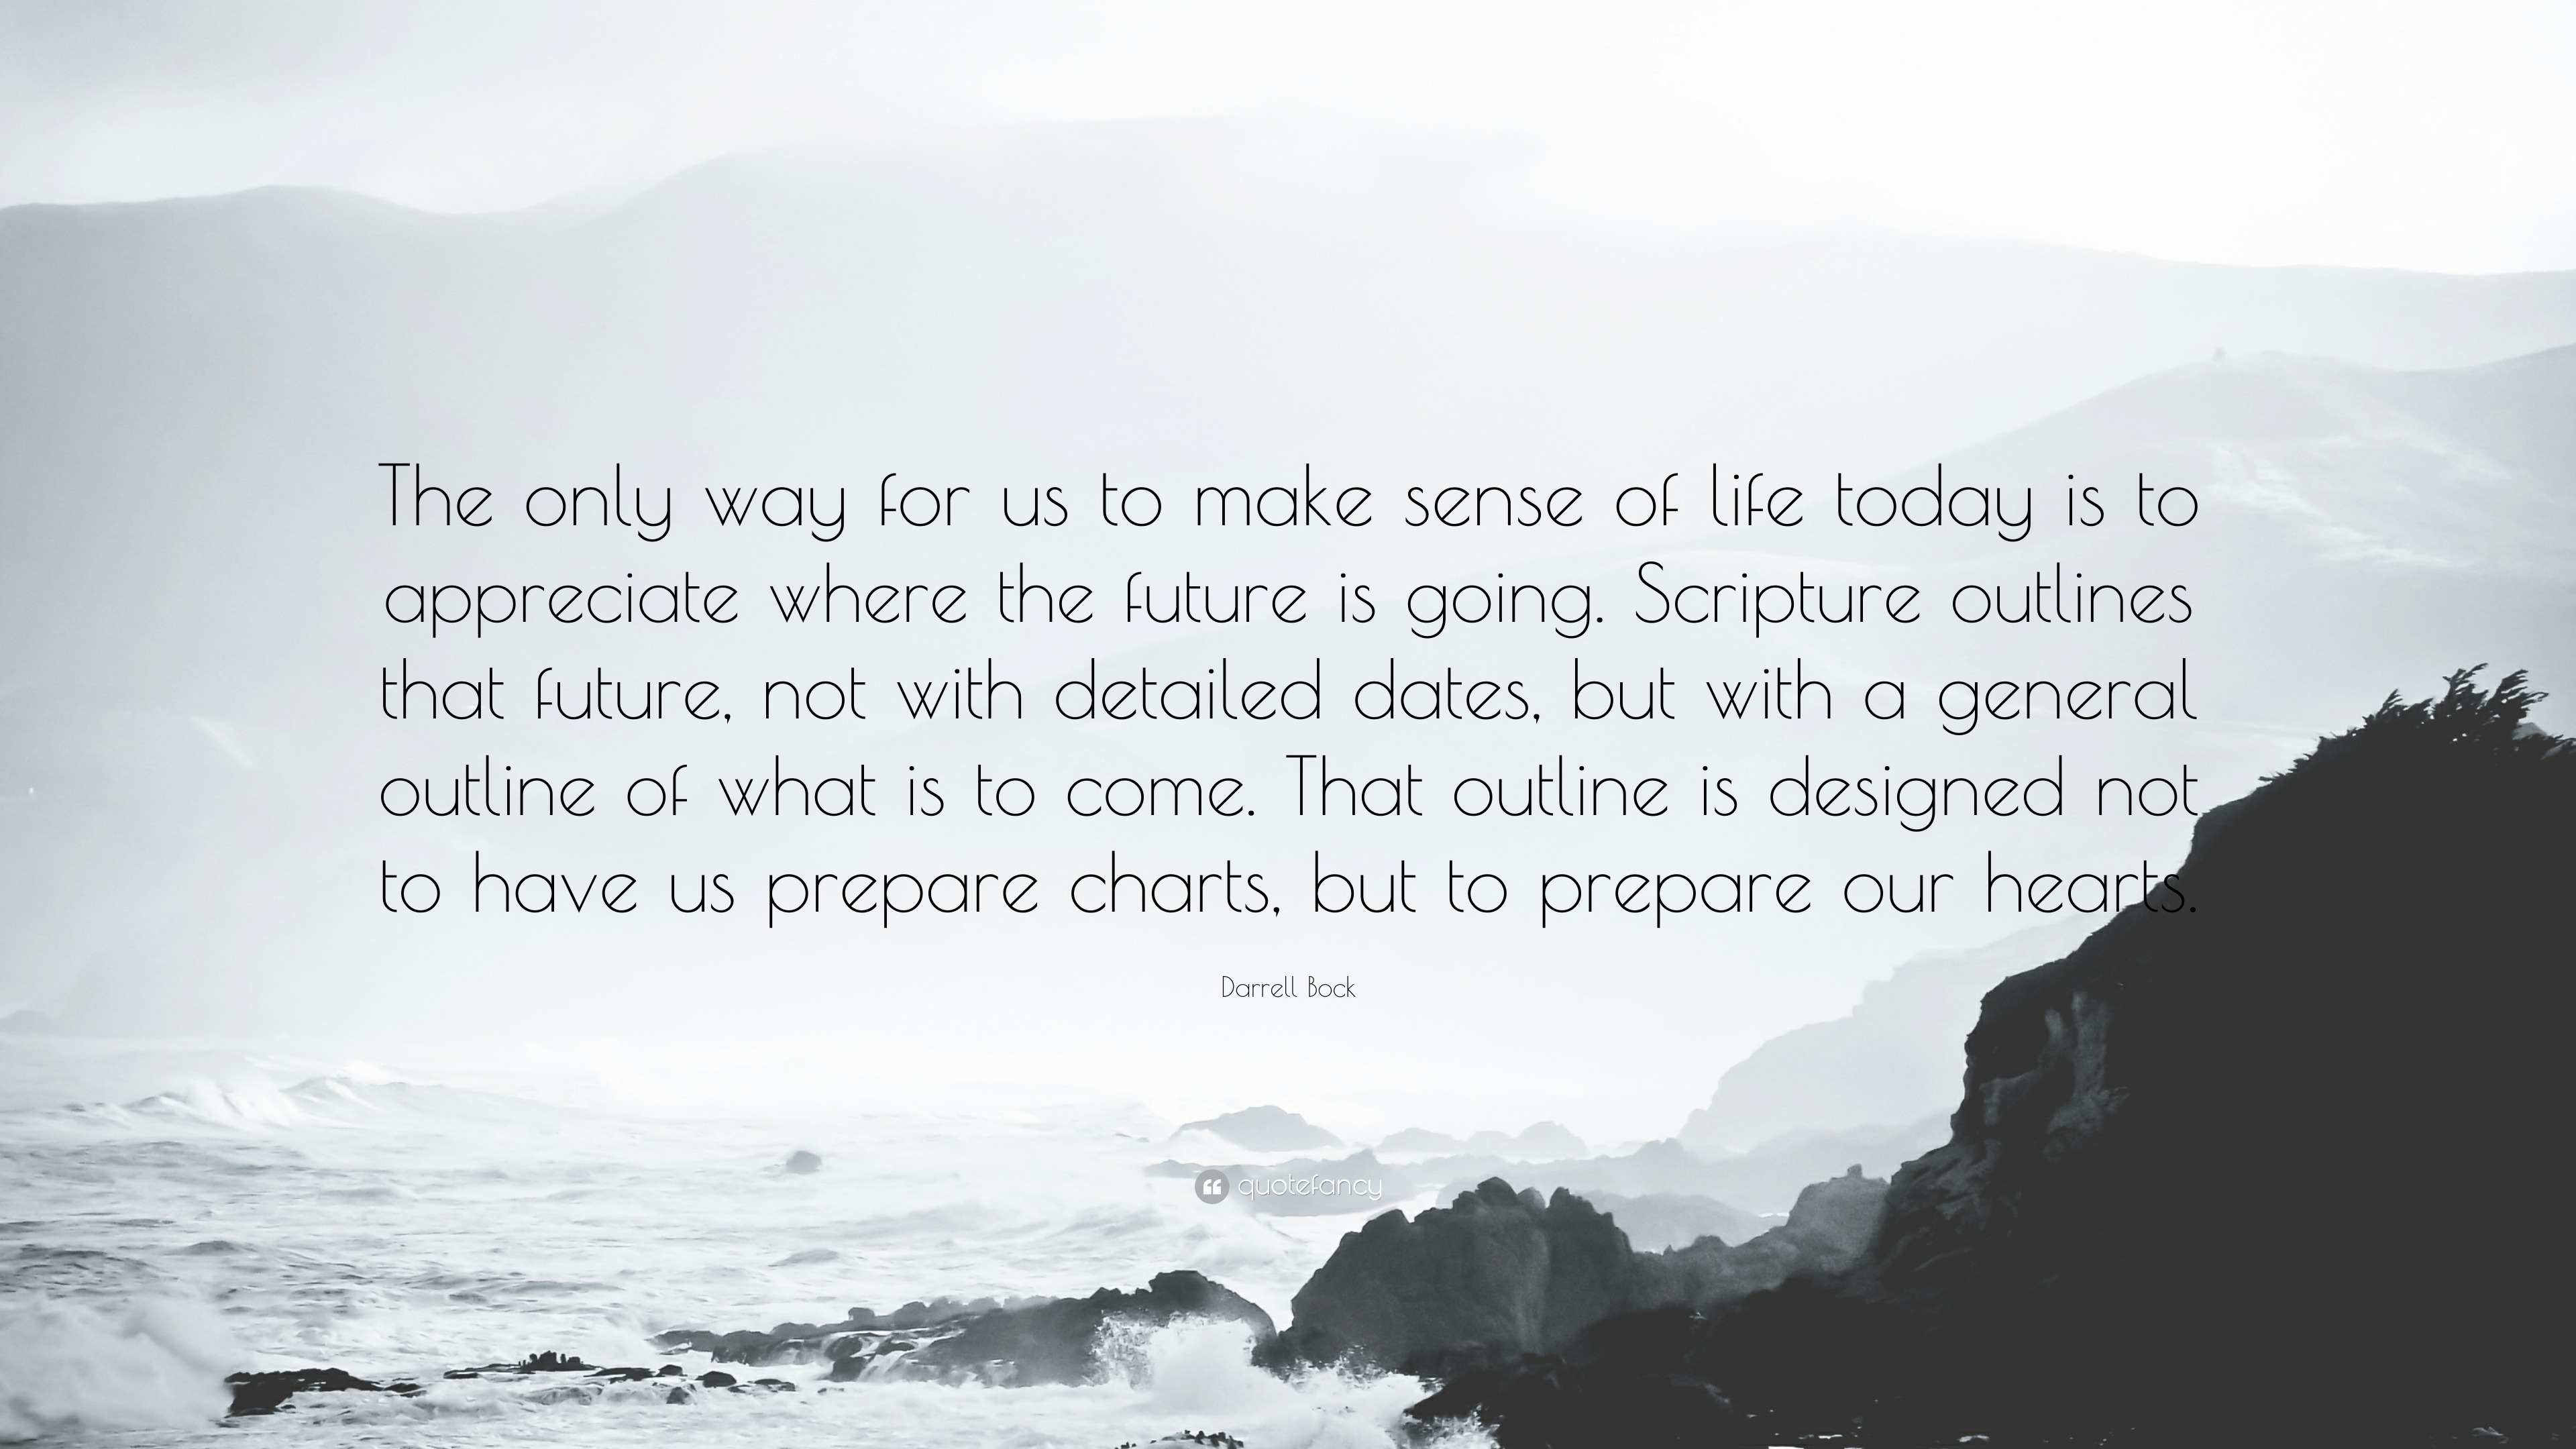 Darrell Bock Quote “The only way for us to make sense of life today